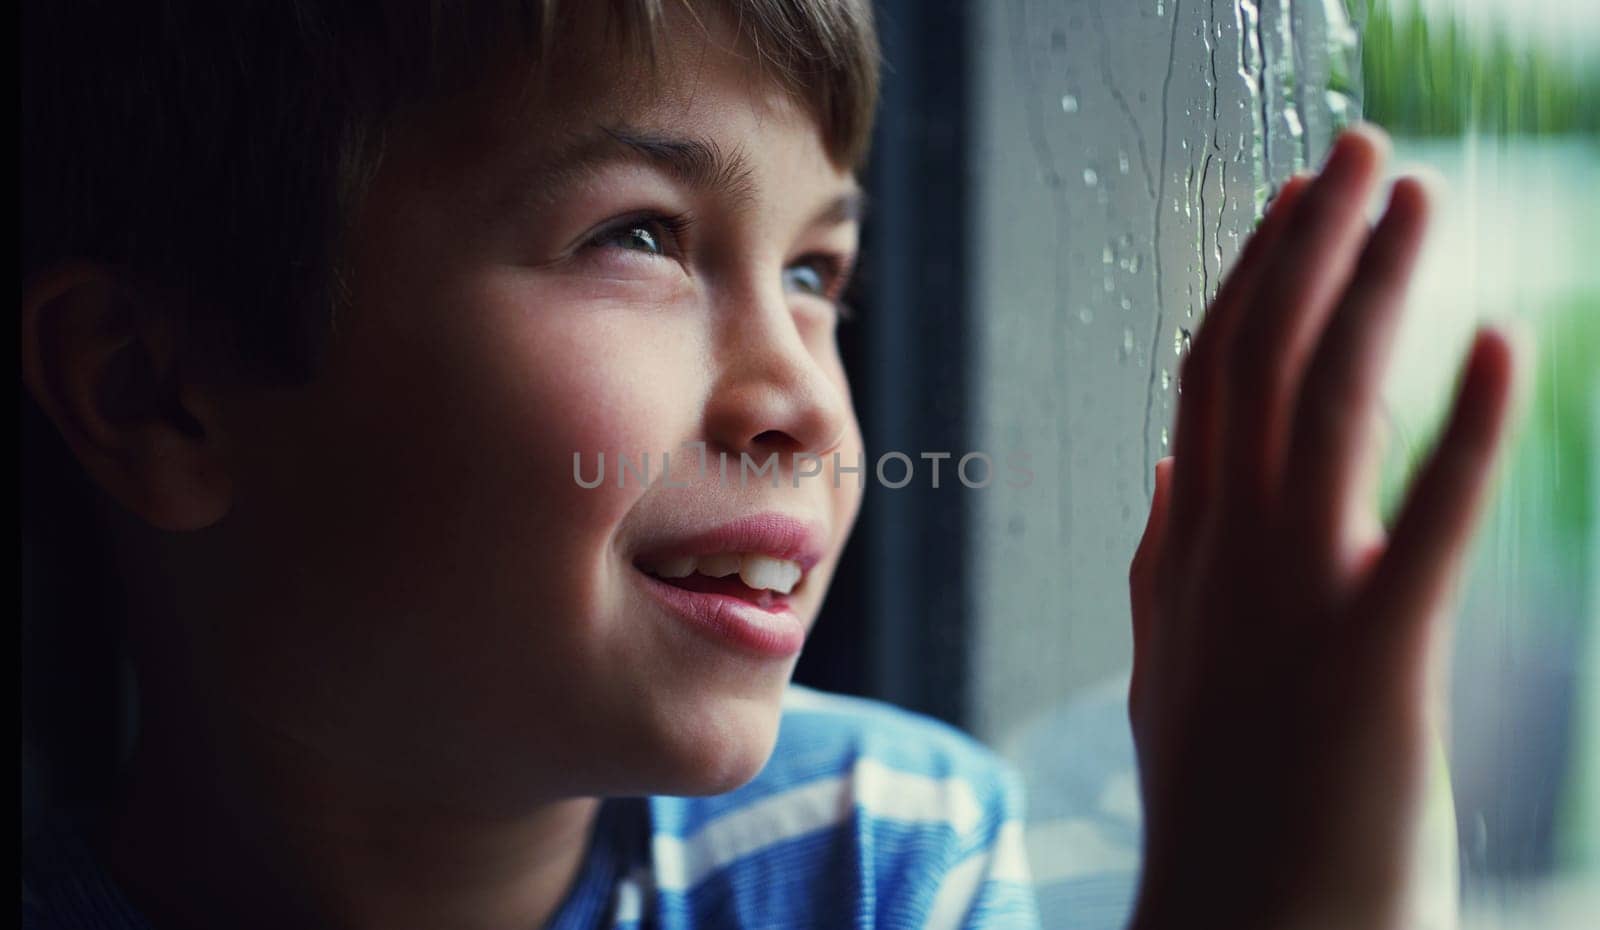 Child, window and smile at rain drops or thinking in home with cold weather, thoughts or future. Male person, boy and hand or contemplating in winter for decision or wondering, youth or daydreaming.